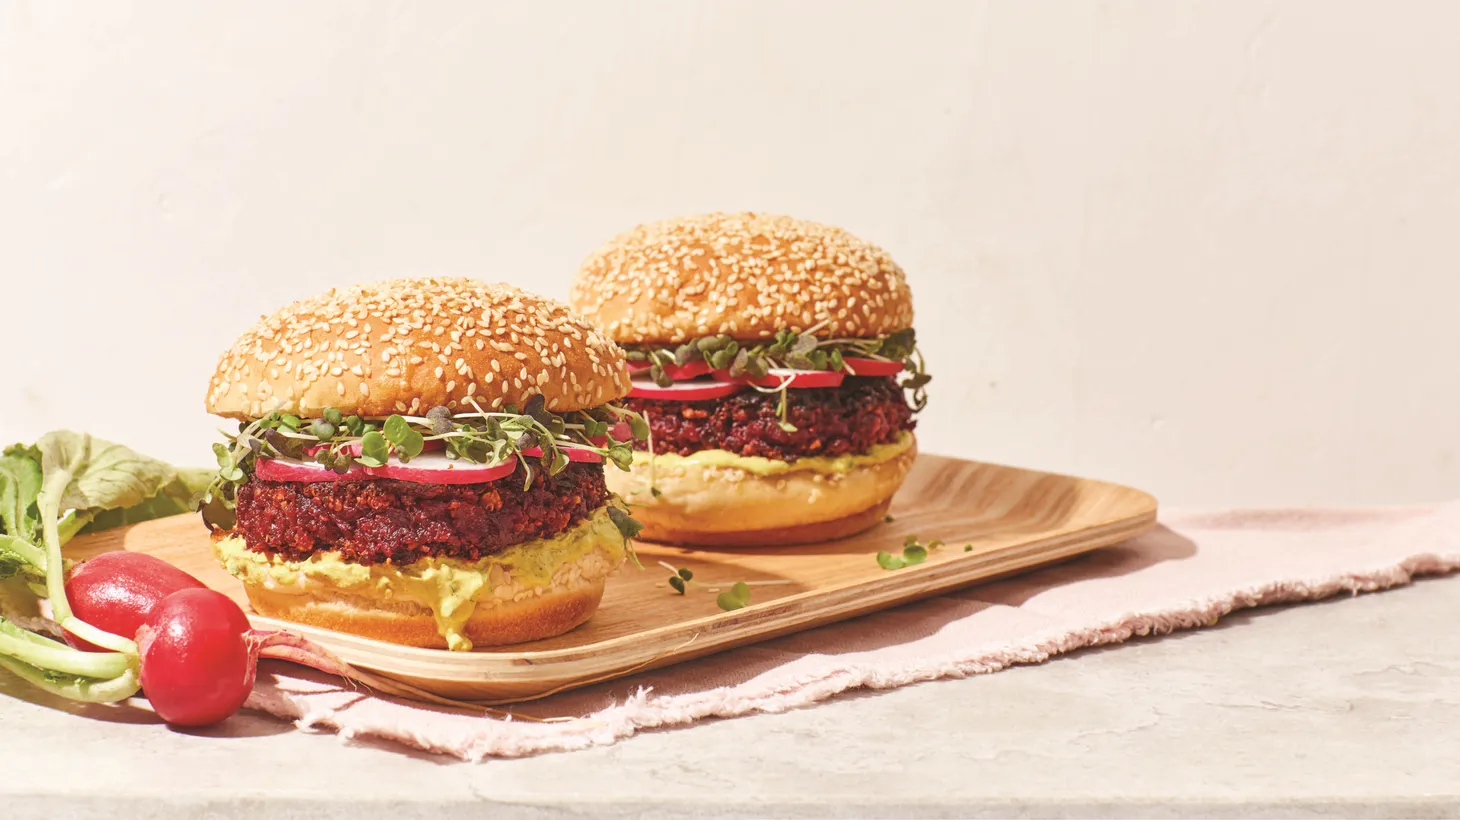 Coarsely shredded beets and hazelnuts are combined for this veggie burger.